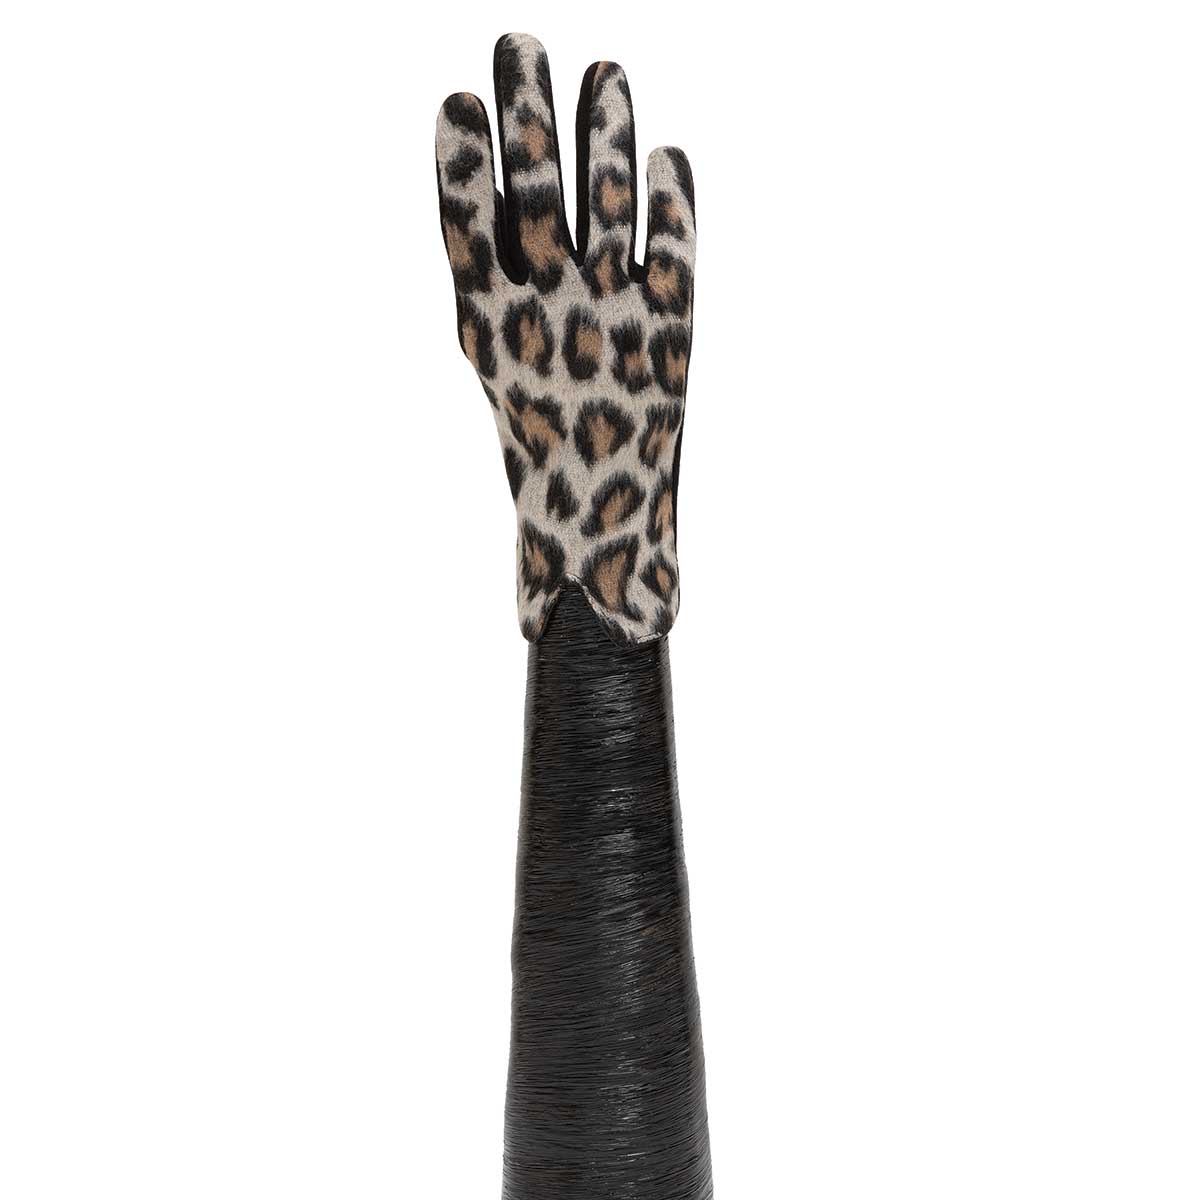 TAN AND BROWN LEOPARD GLOVES